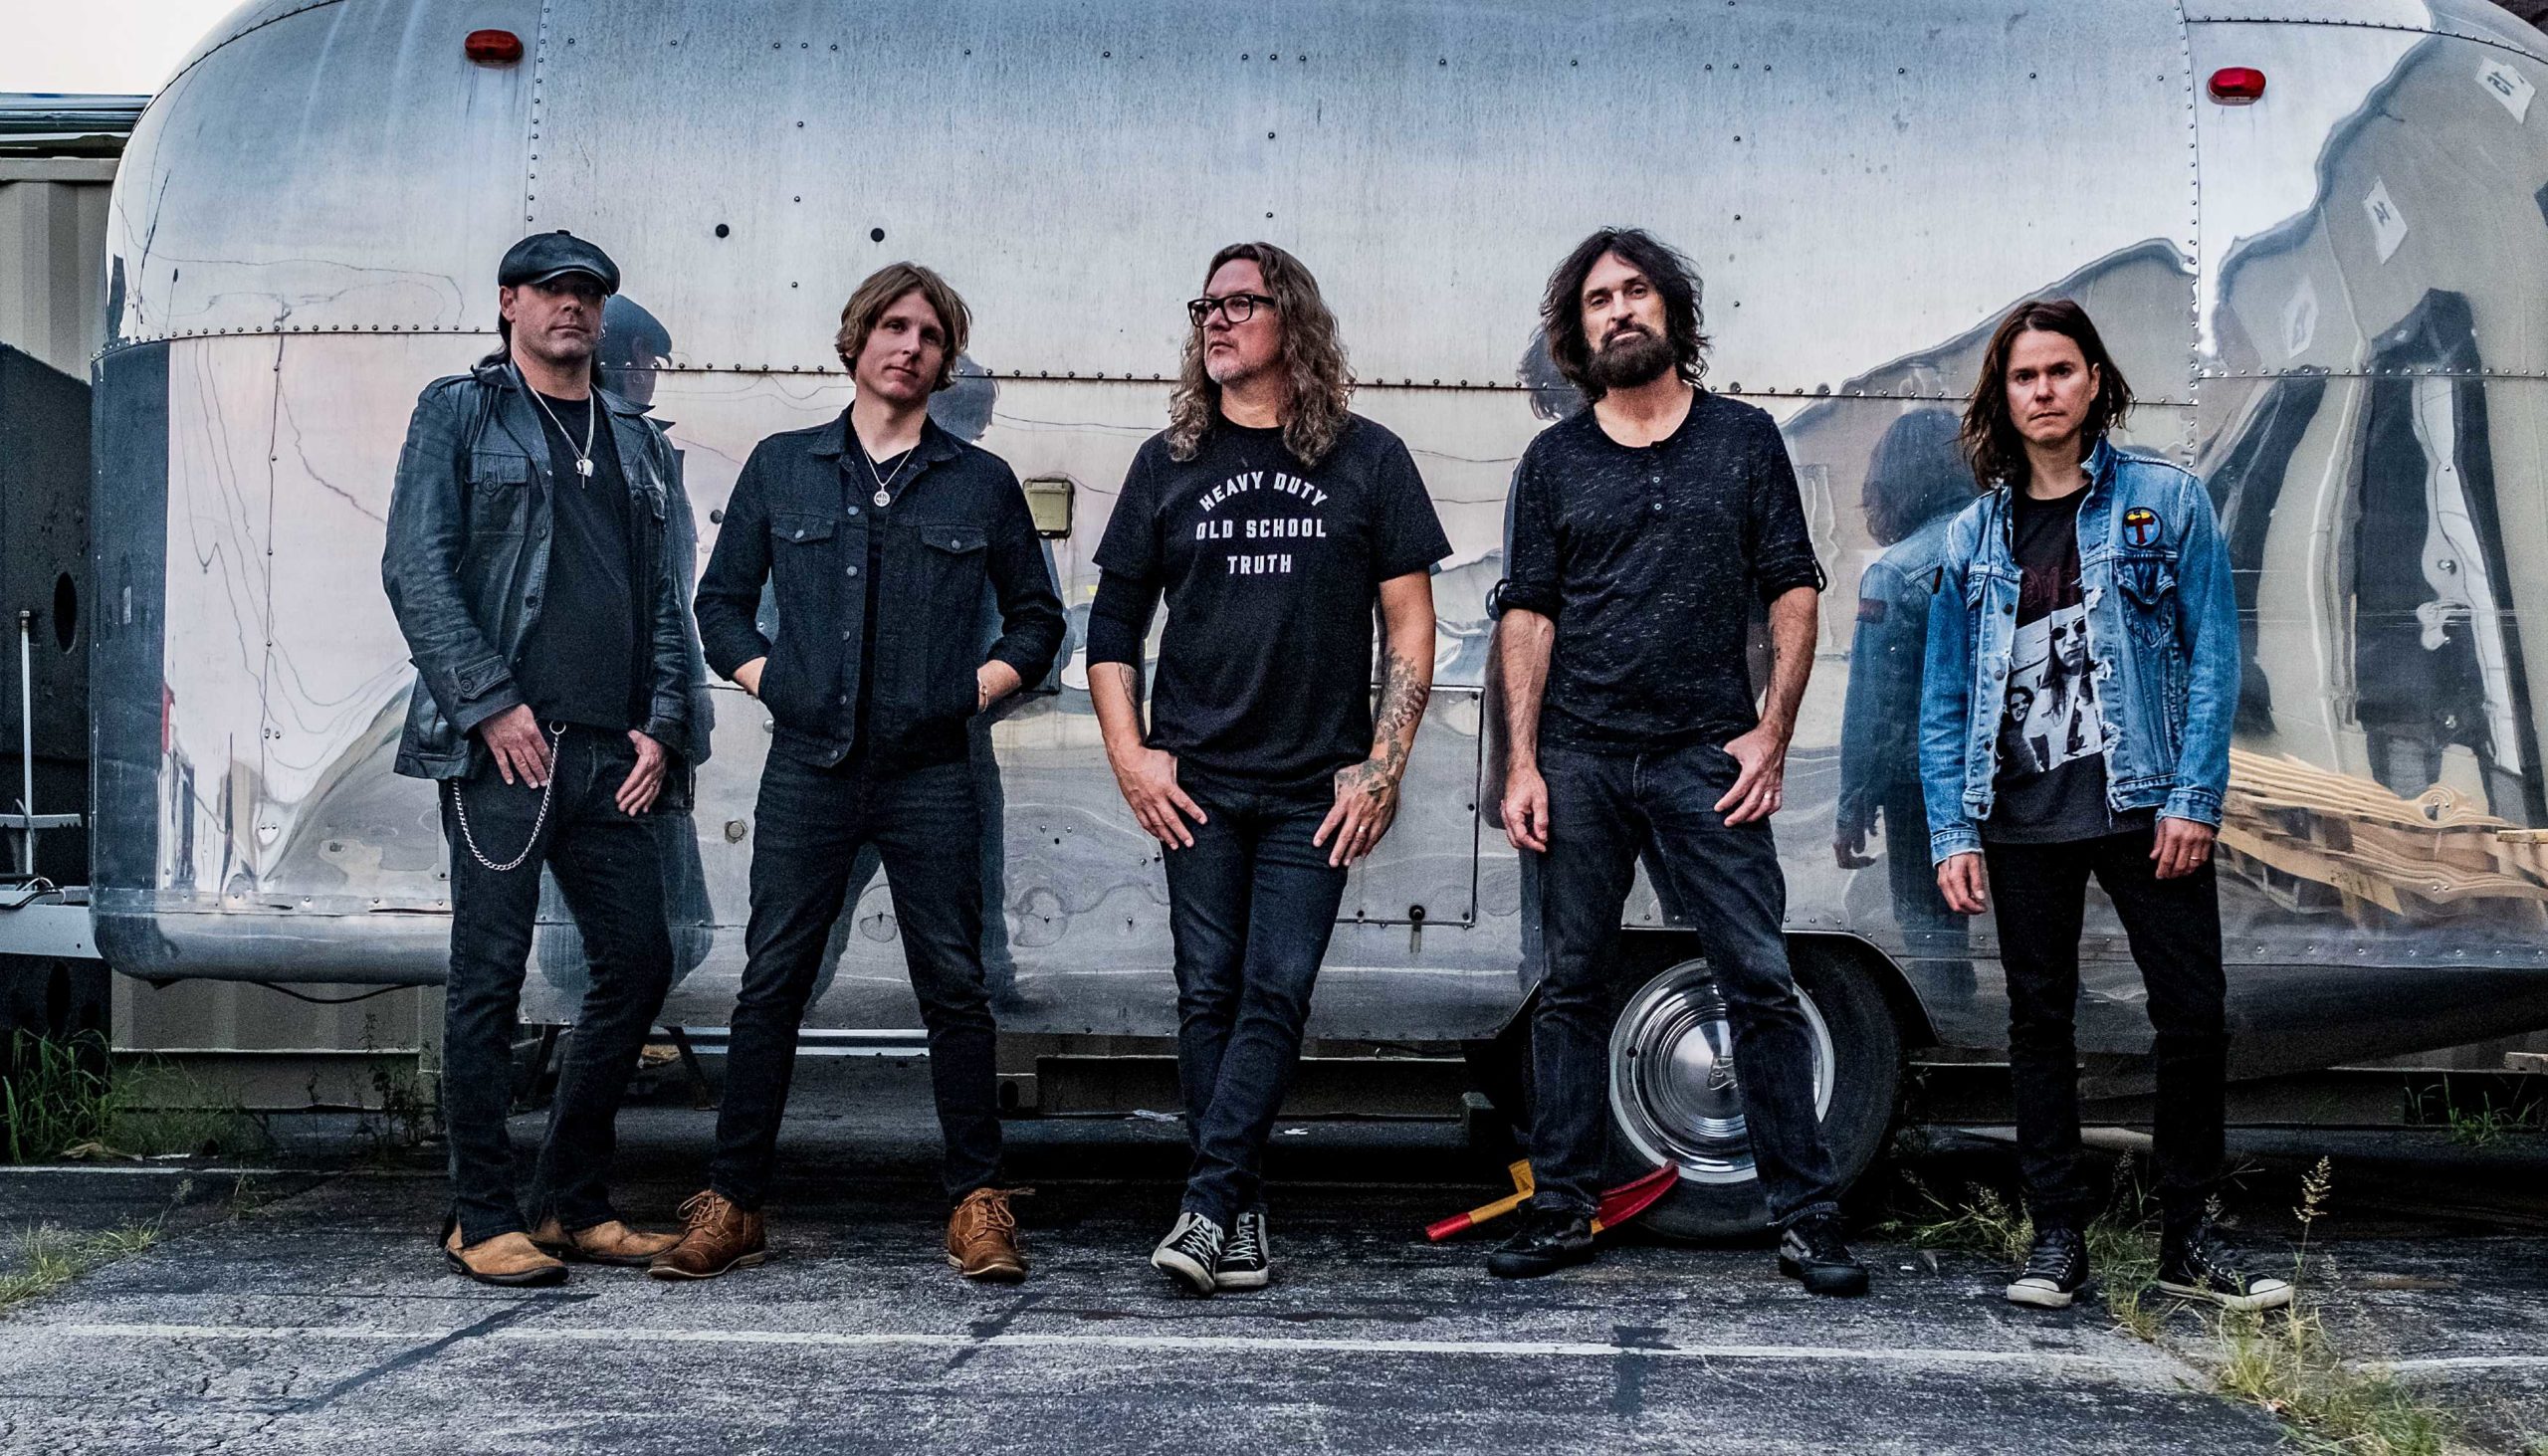 Candlebox Frontman Kevin Martin on Pack Mentality, Growing up in